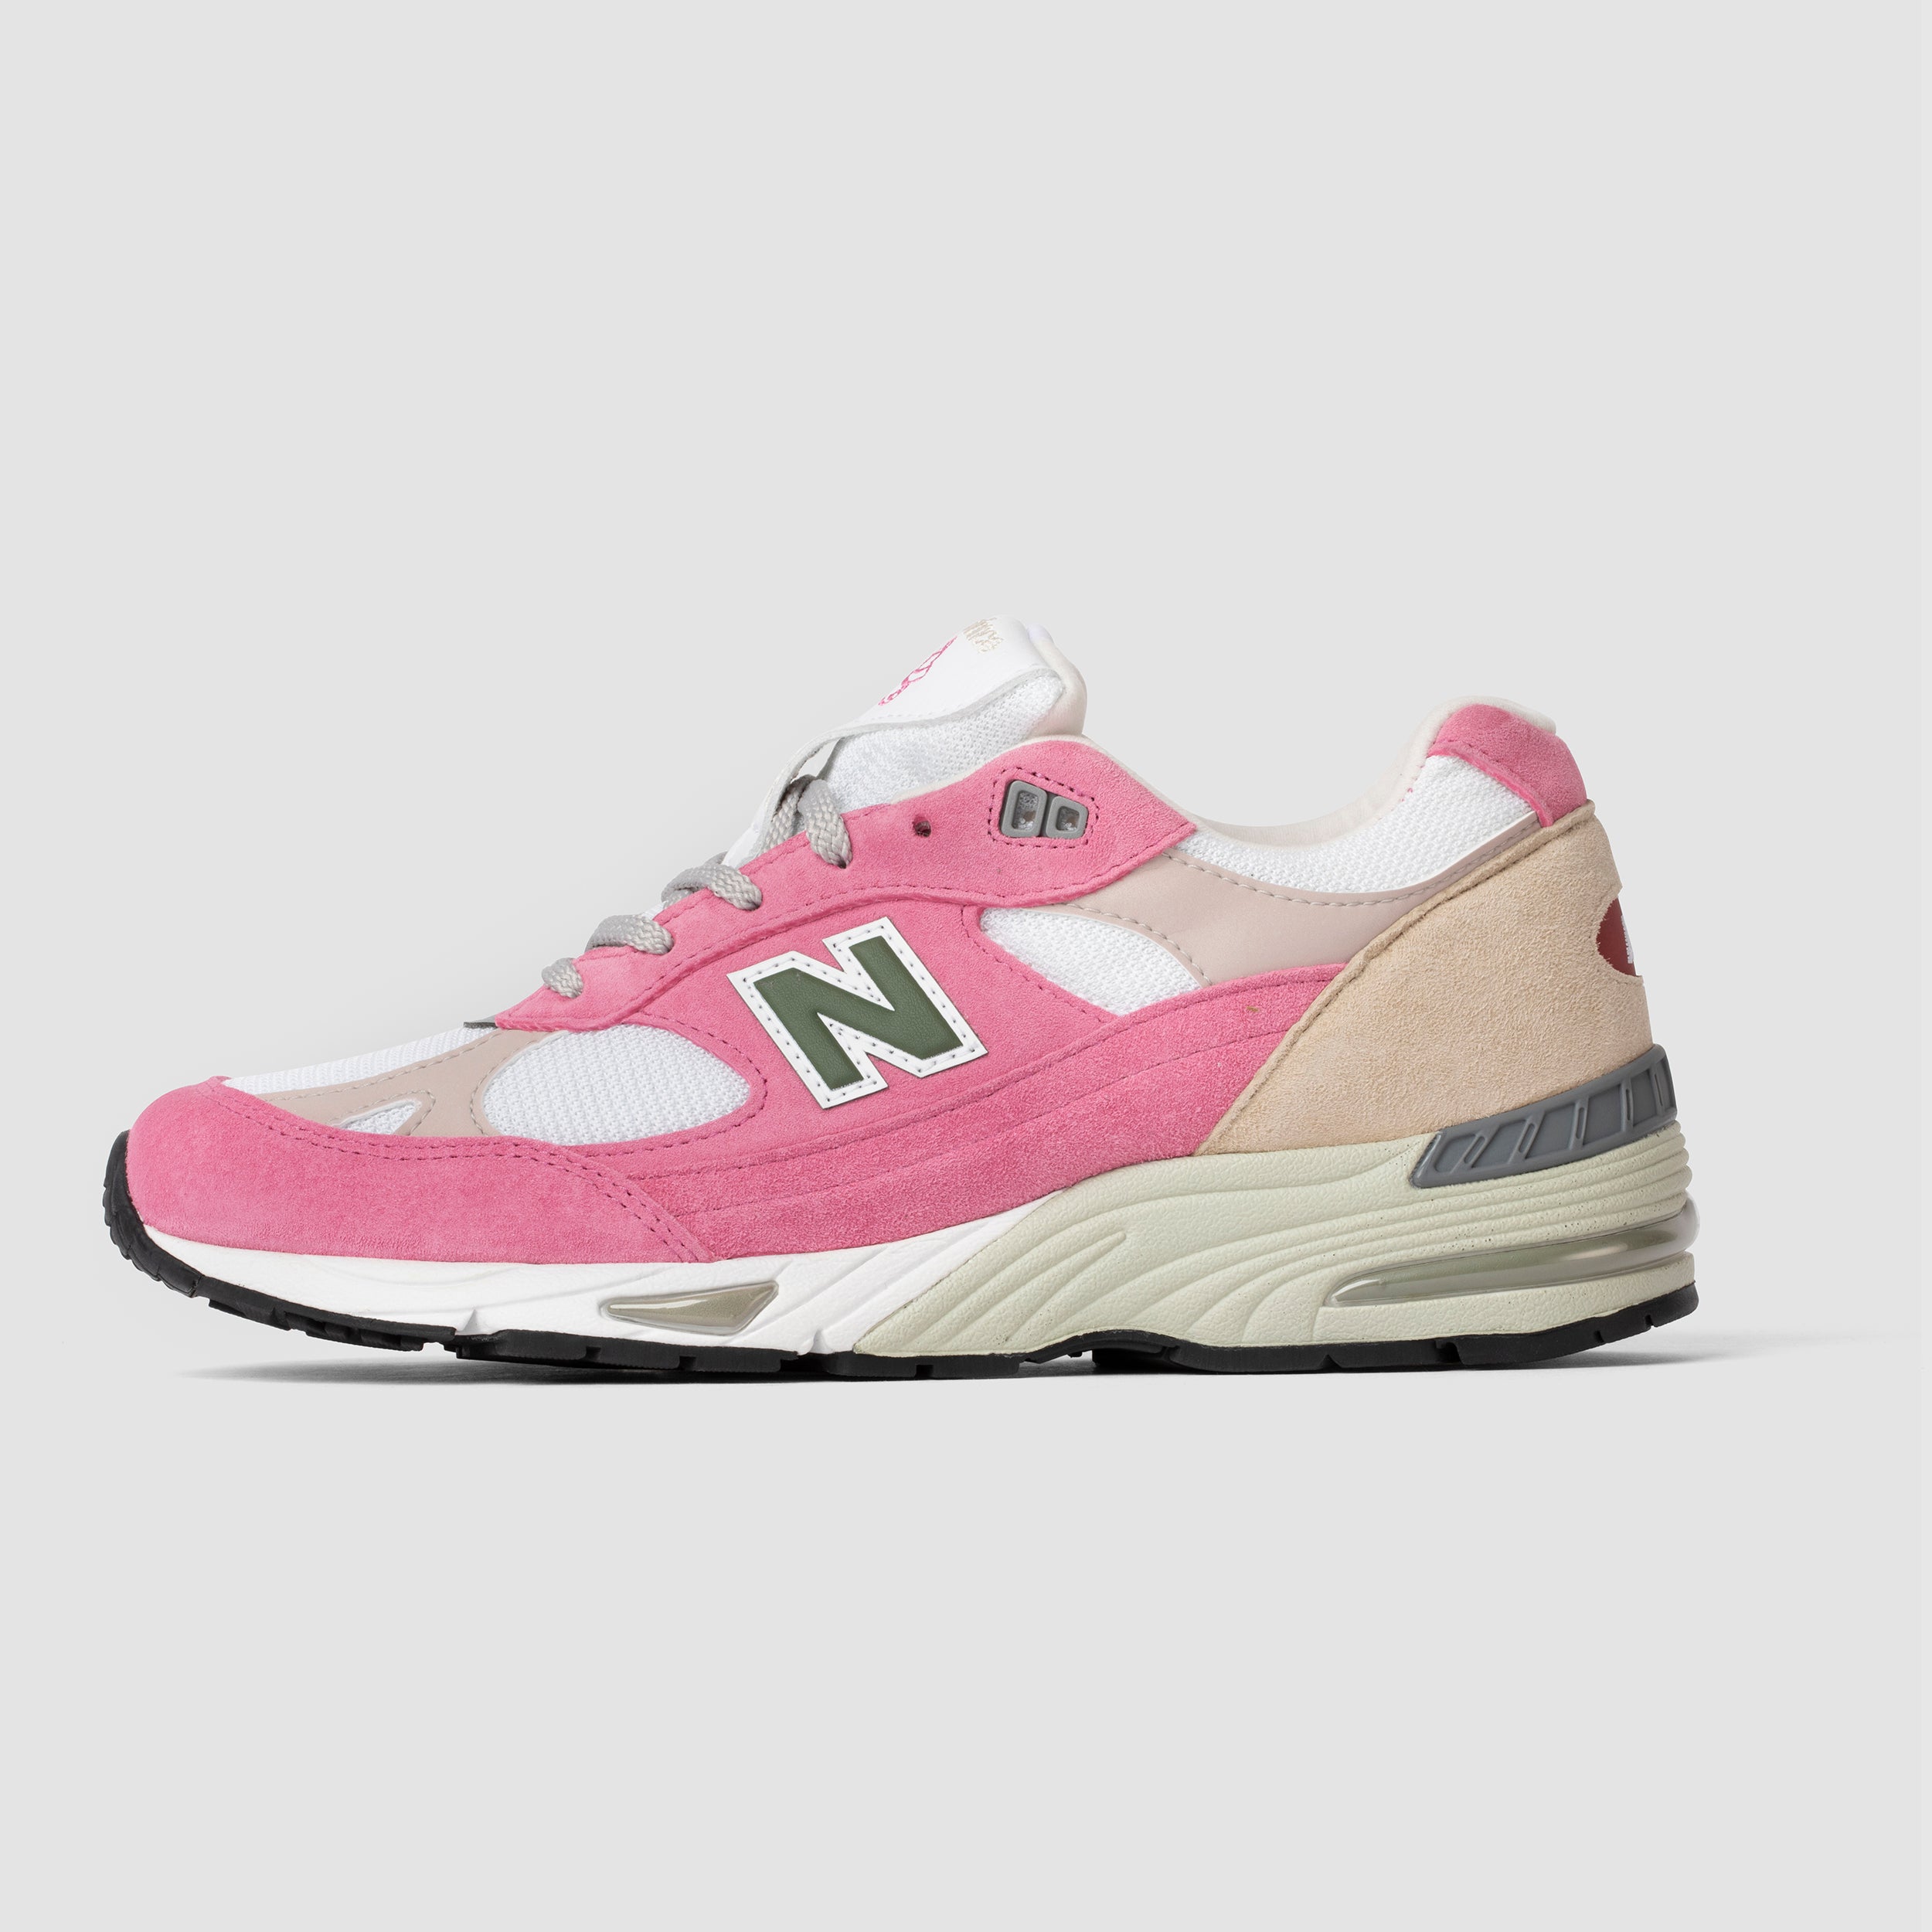 All Gone and Paperboy New Balance 991